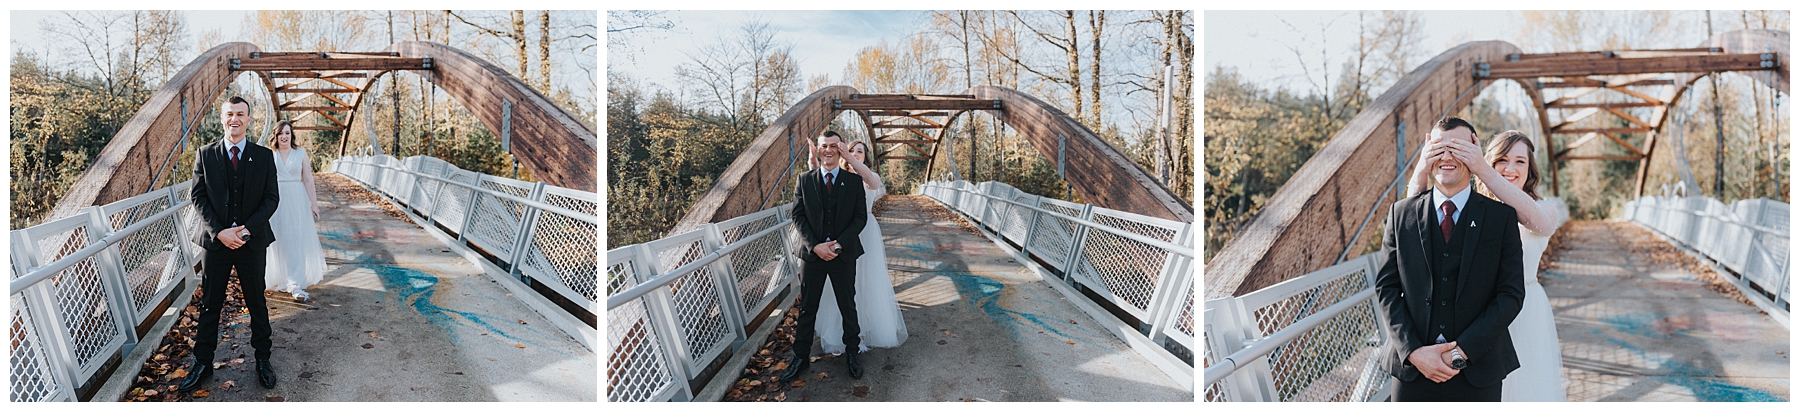 Issaquah Wedding Venues, Confluence Park, Confluence Park Elopement, Image result for Issaquah Elopement, Seattle Elopement Photographer, Issaquah Elopement, An Intimate Pacific Northwest Elopement, Lauren Ryan Photography, Seattle Wedding Photographer, Seattle Elopement Photographer,seattle elopement